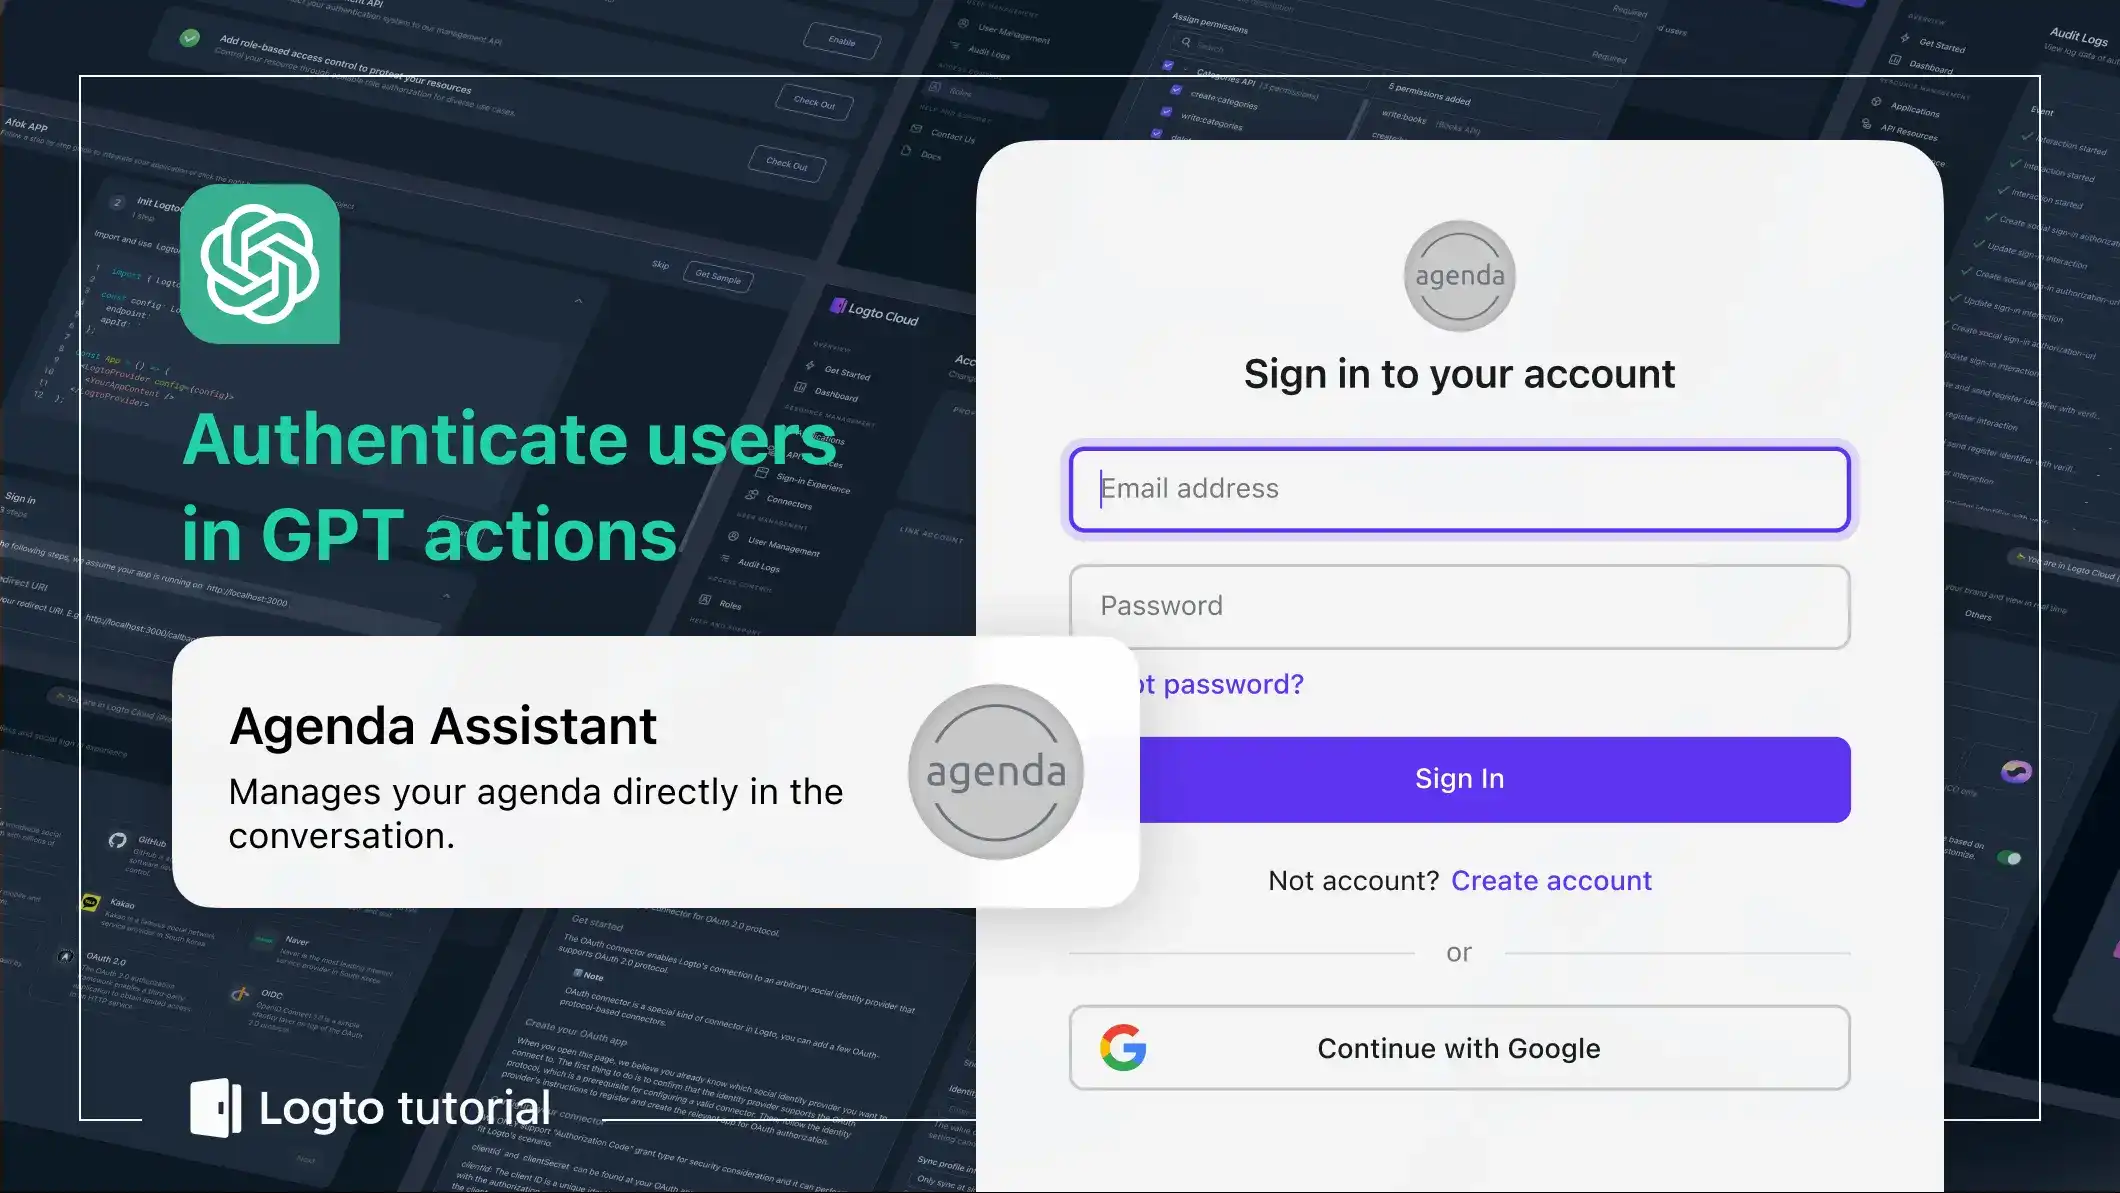 Authenticate users in GPT actions: Build a personal agenda assistant